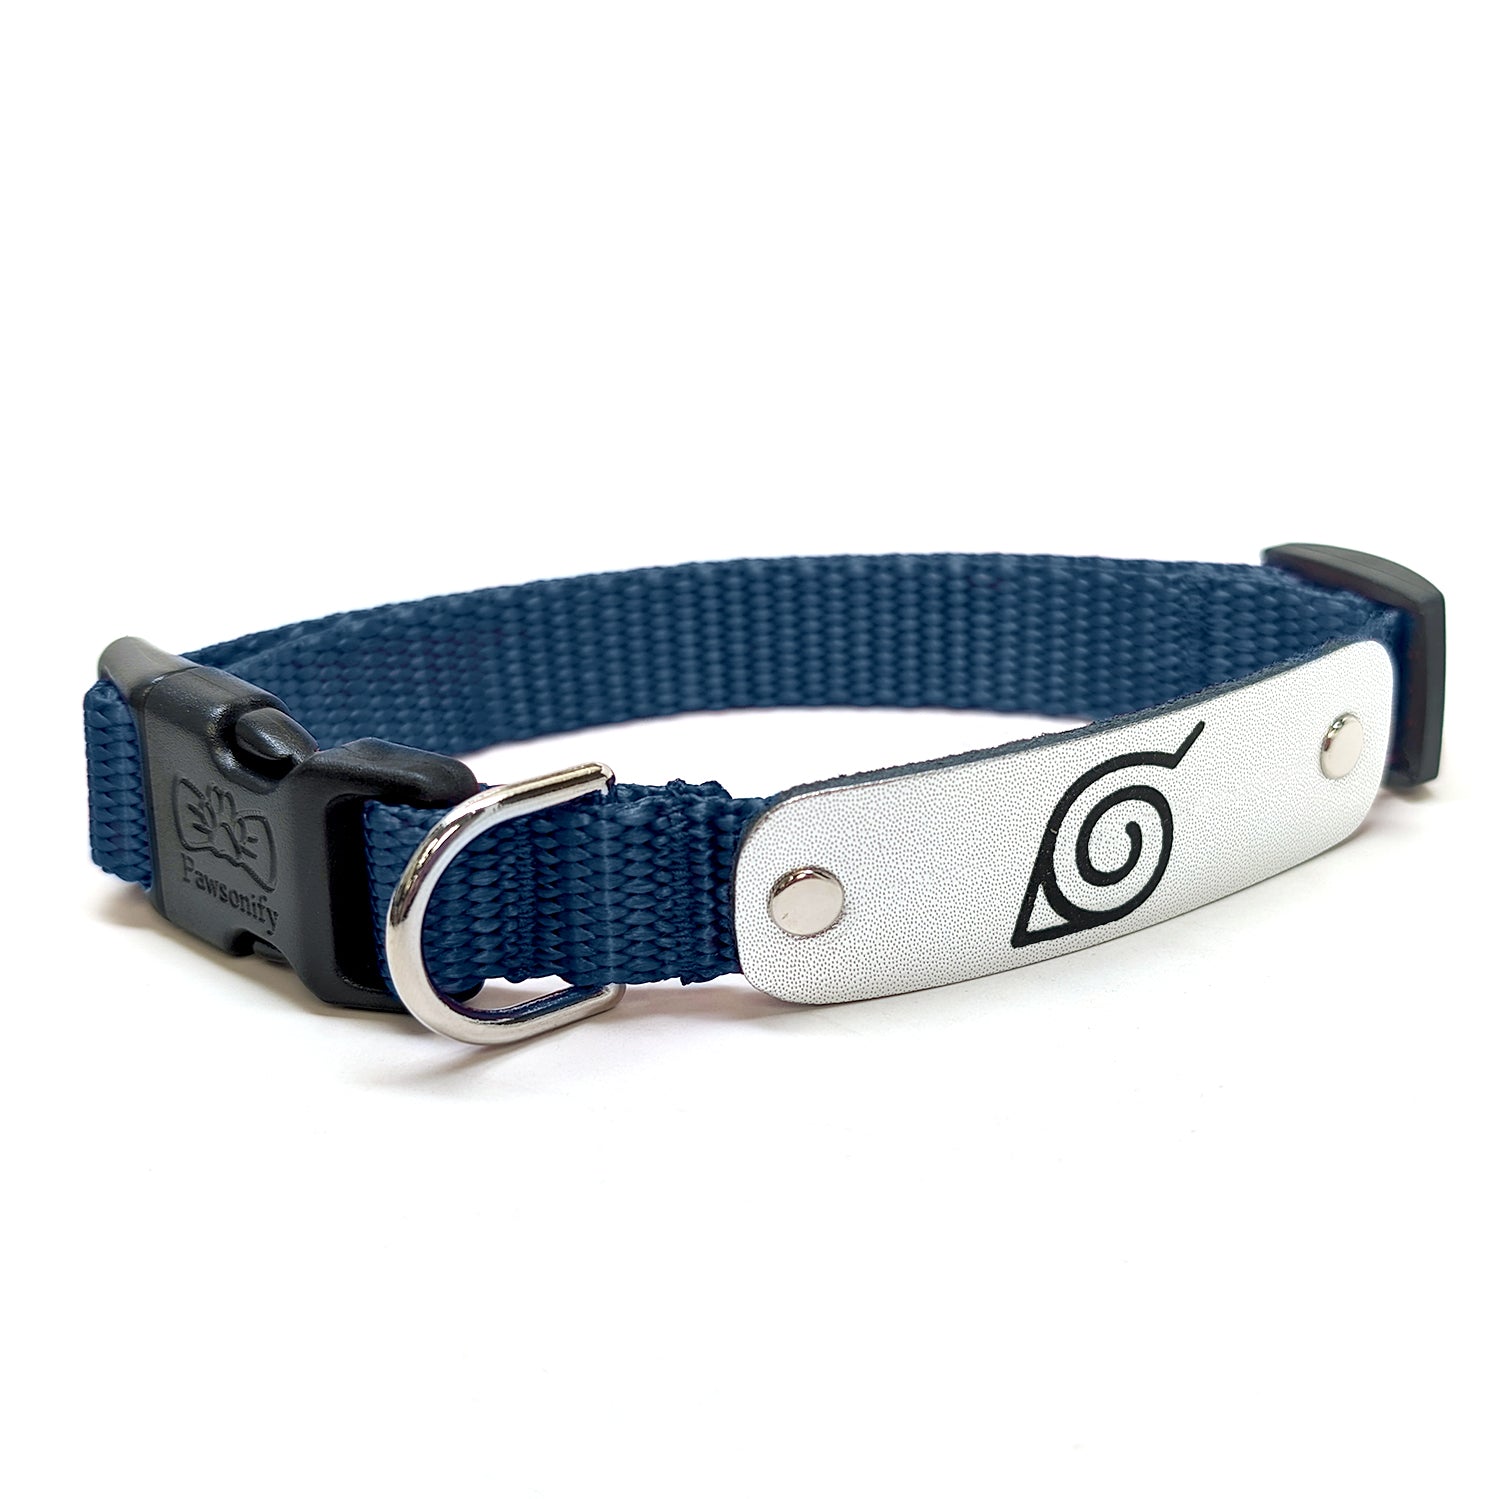 Naruto Shippuden x Pawsonify - Officially Licensed Ninja Collar (Navy) for Small Dogs #size_Dog: (S) 11-15